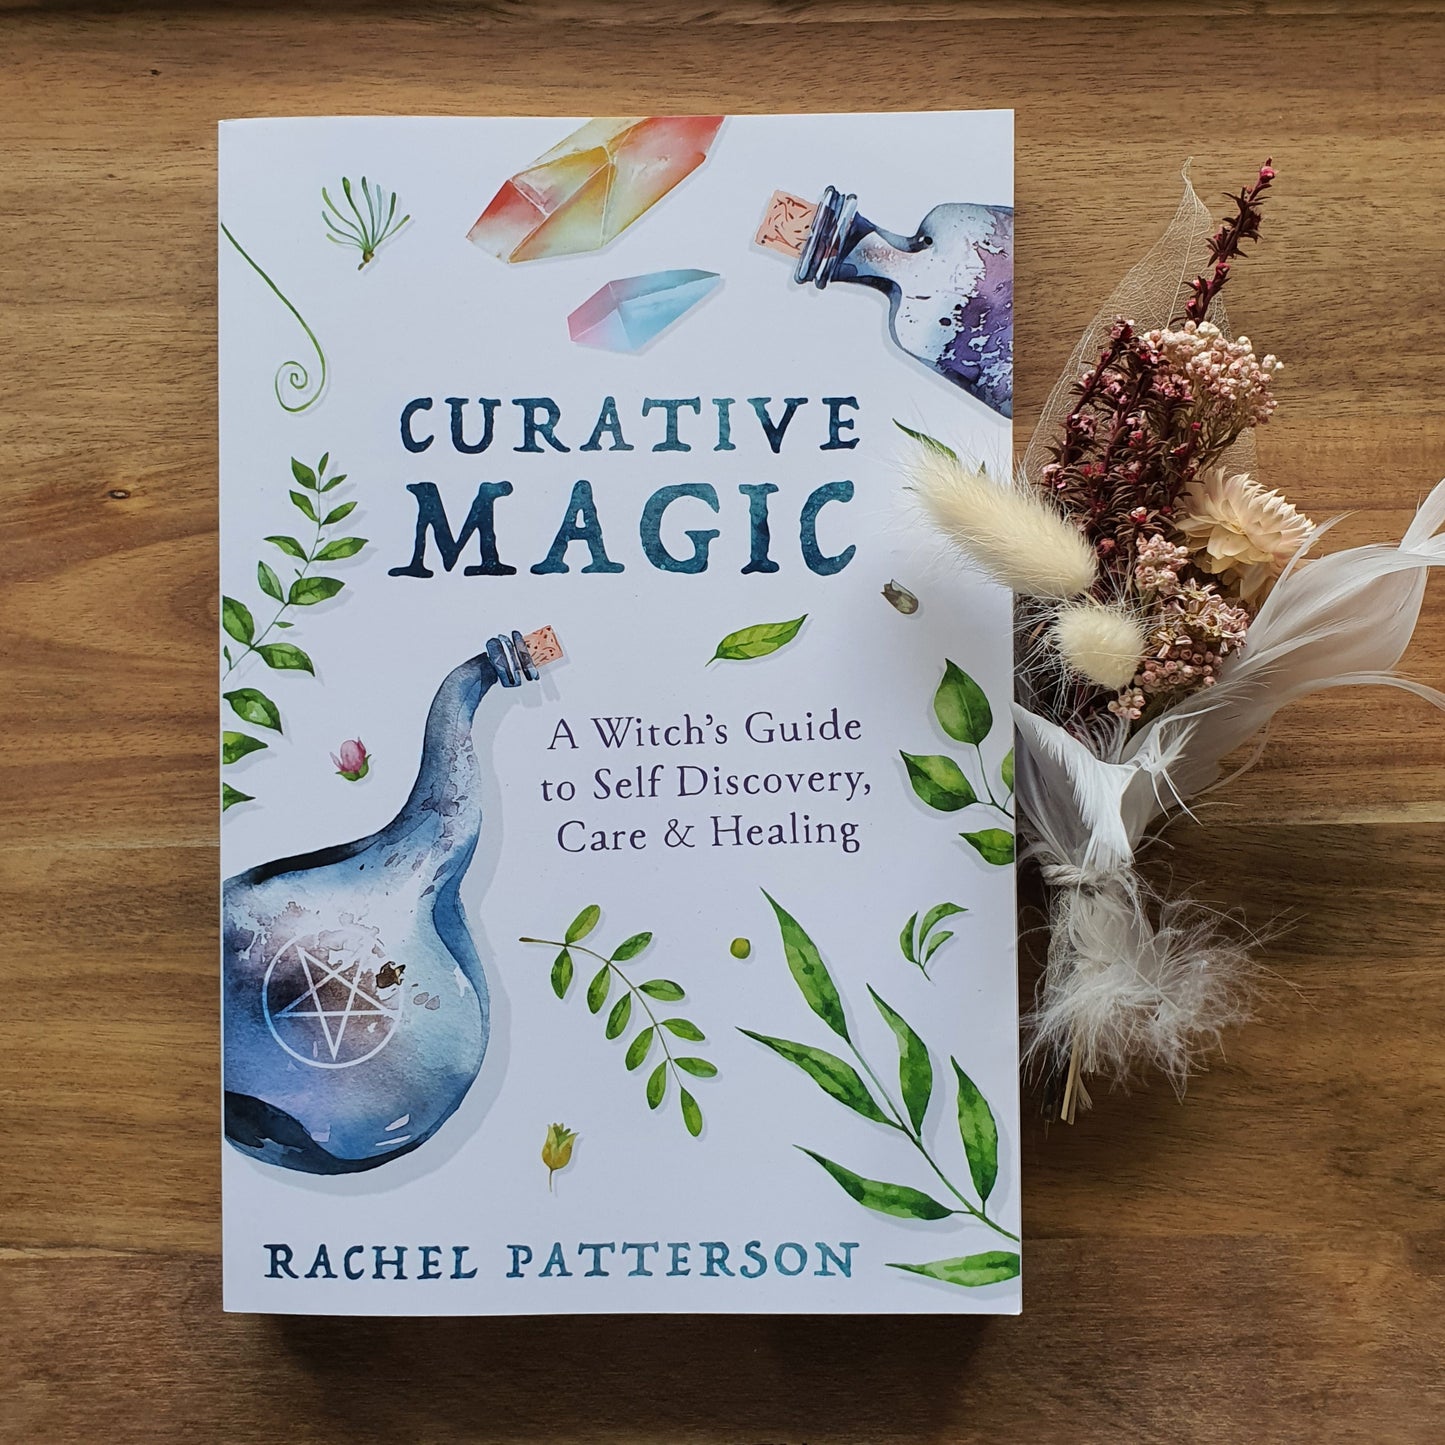 Curative Magic - A Witch's Guide to Self-Discovery, Care and Healing